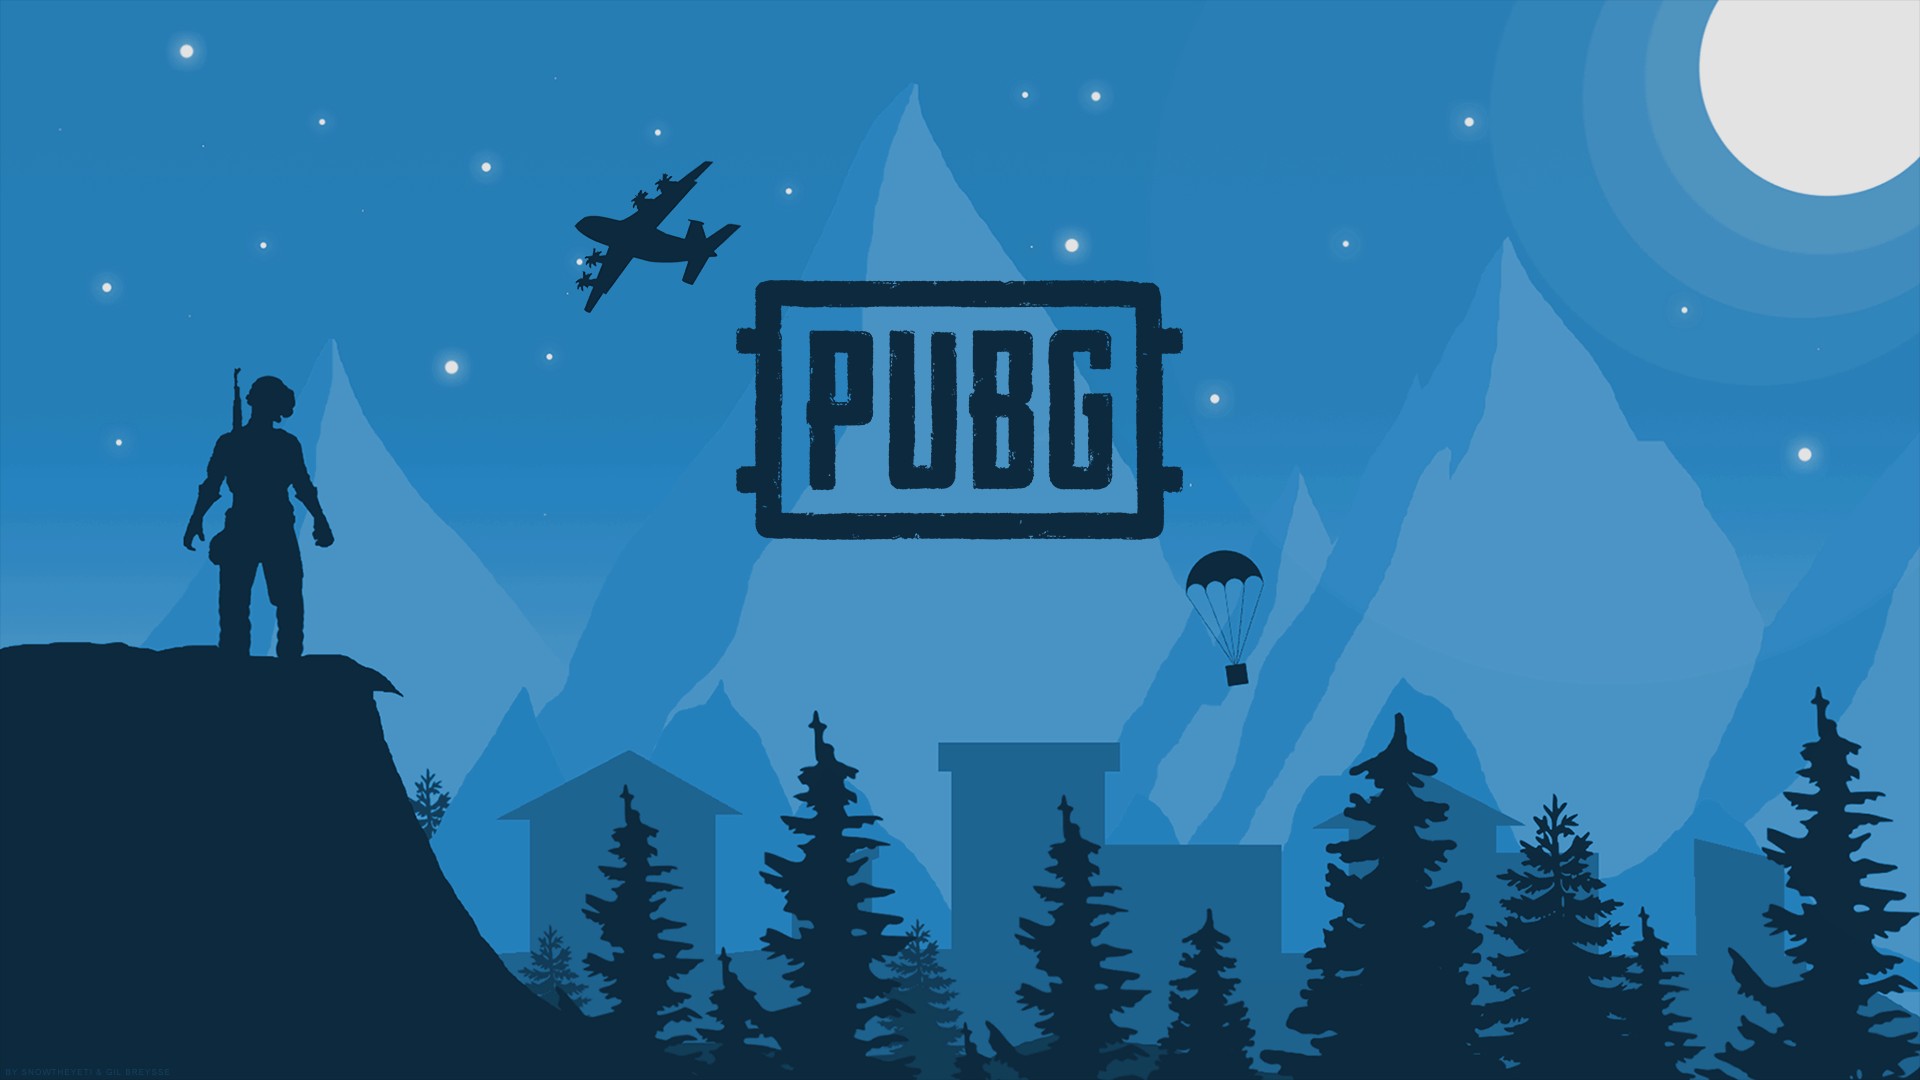 PUBG Xbox One Wallpaper For Desktop with image resolution 1920x1080 pixel. You can use this wallpaper as background for your desktop Computer Screensavers, Android or iPhone smartphones